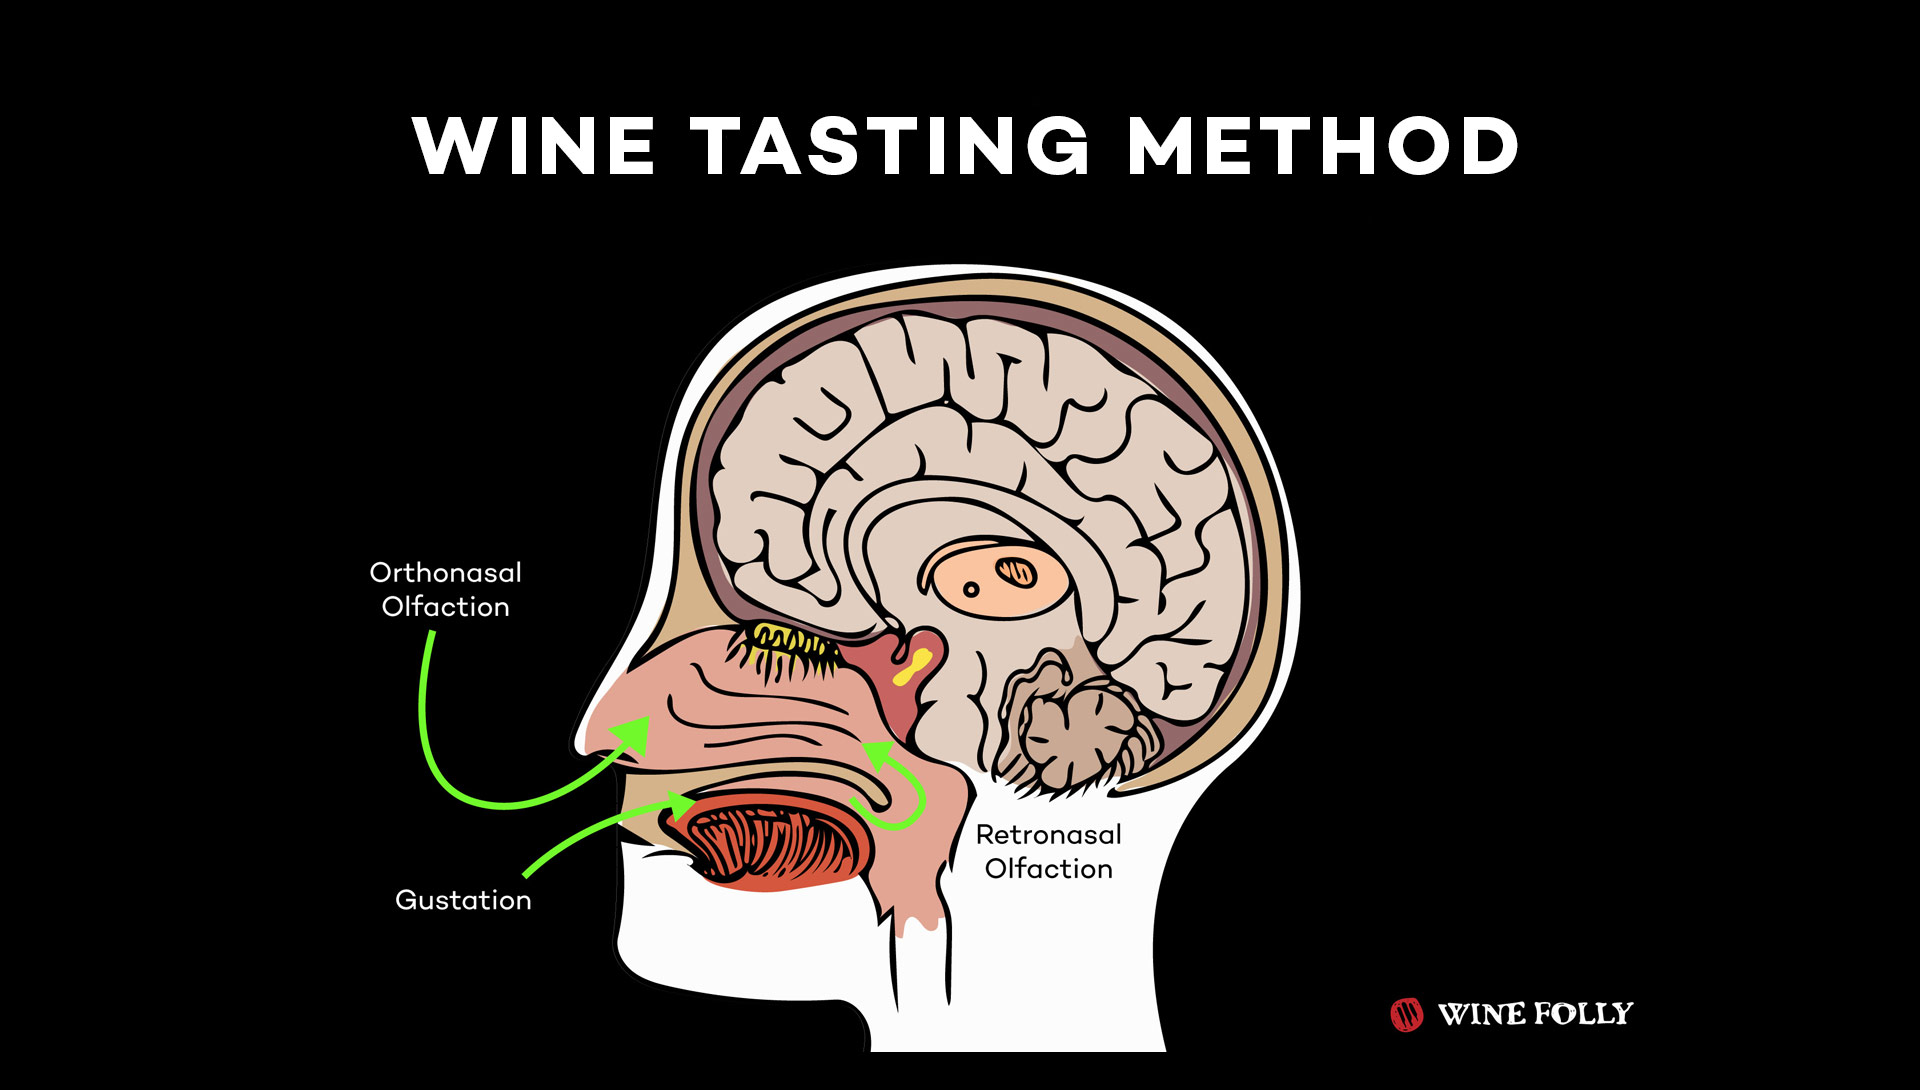 How we taste wine with our noses